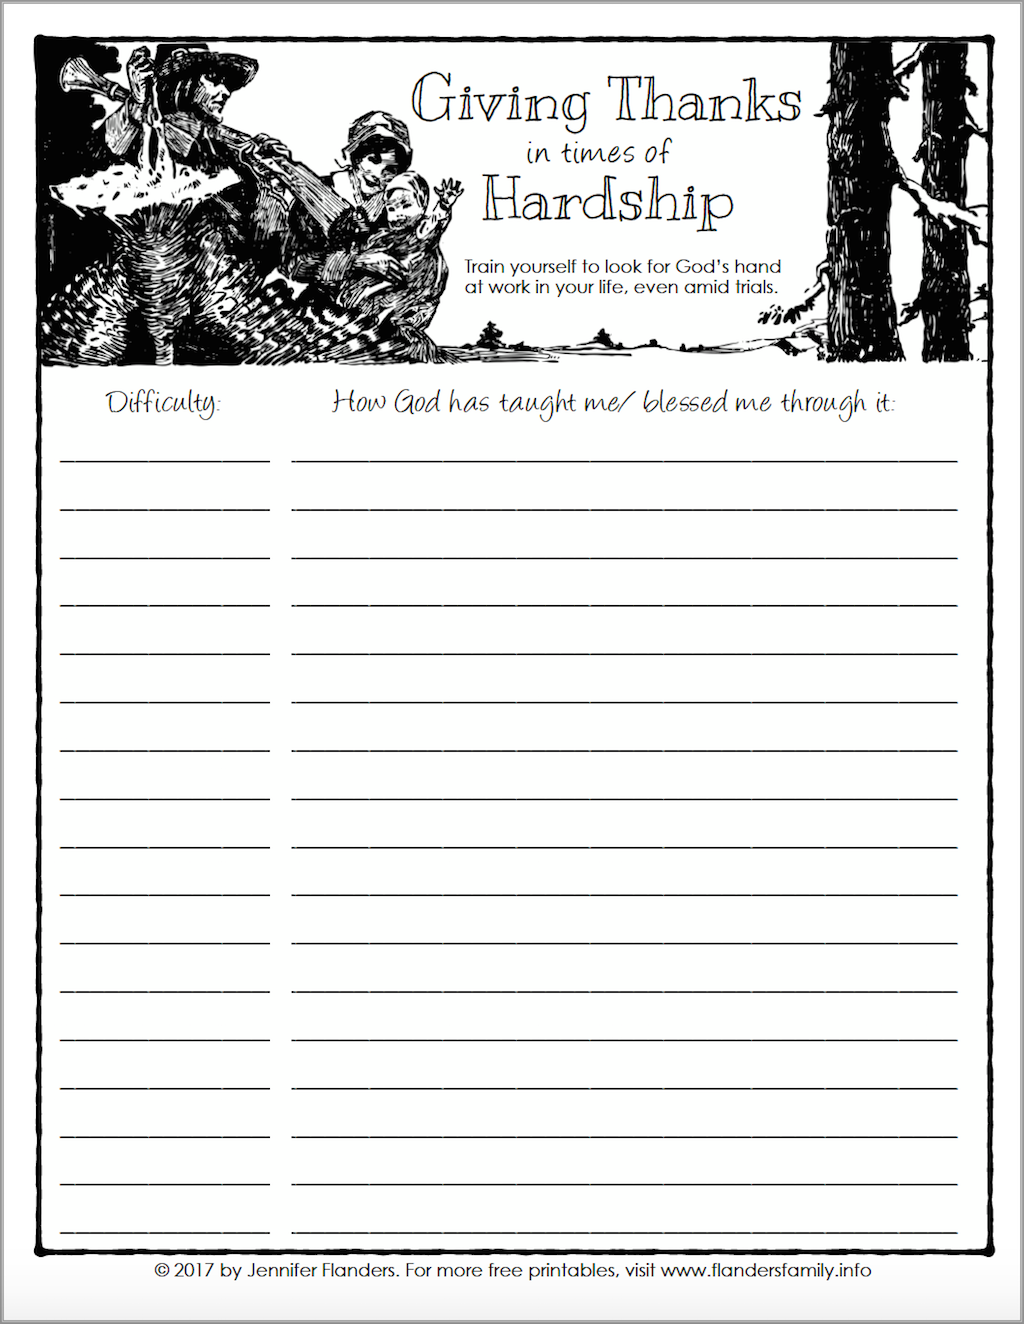 Learning to give thanks in the midst of trials and hardships (free printable)